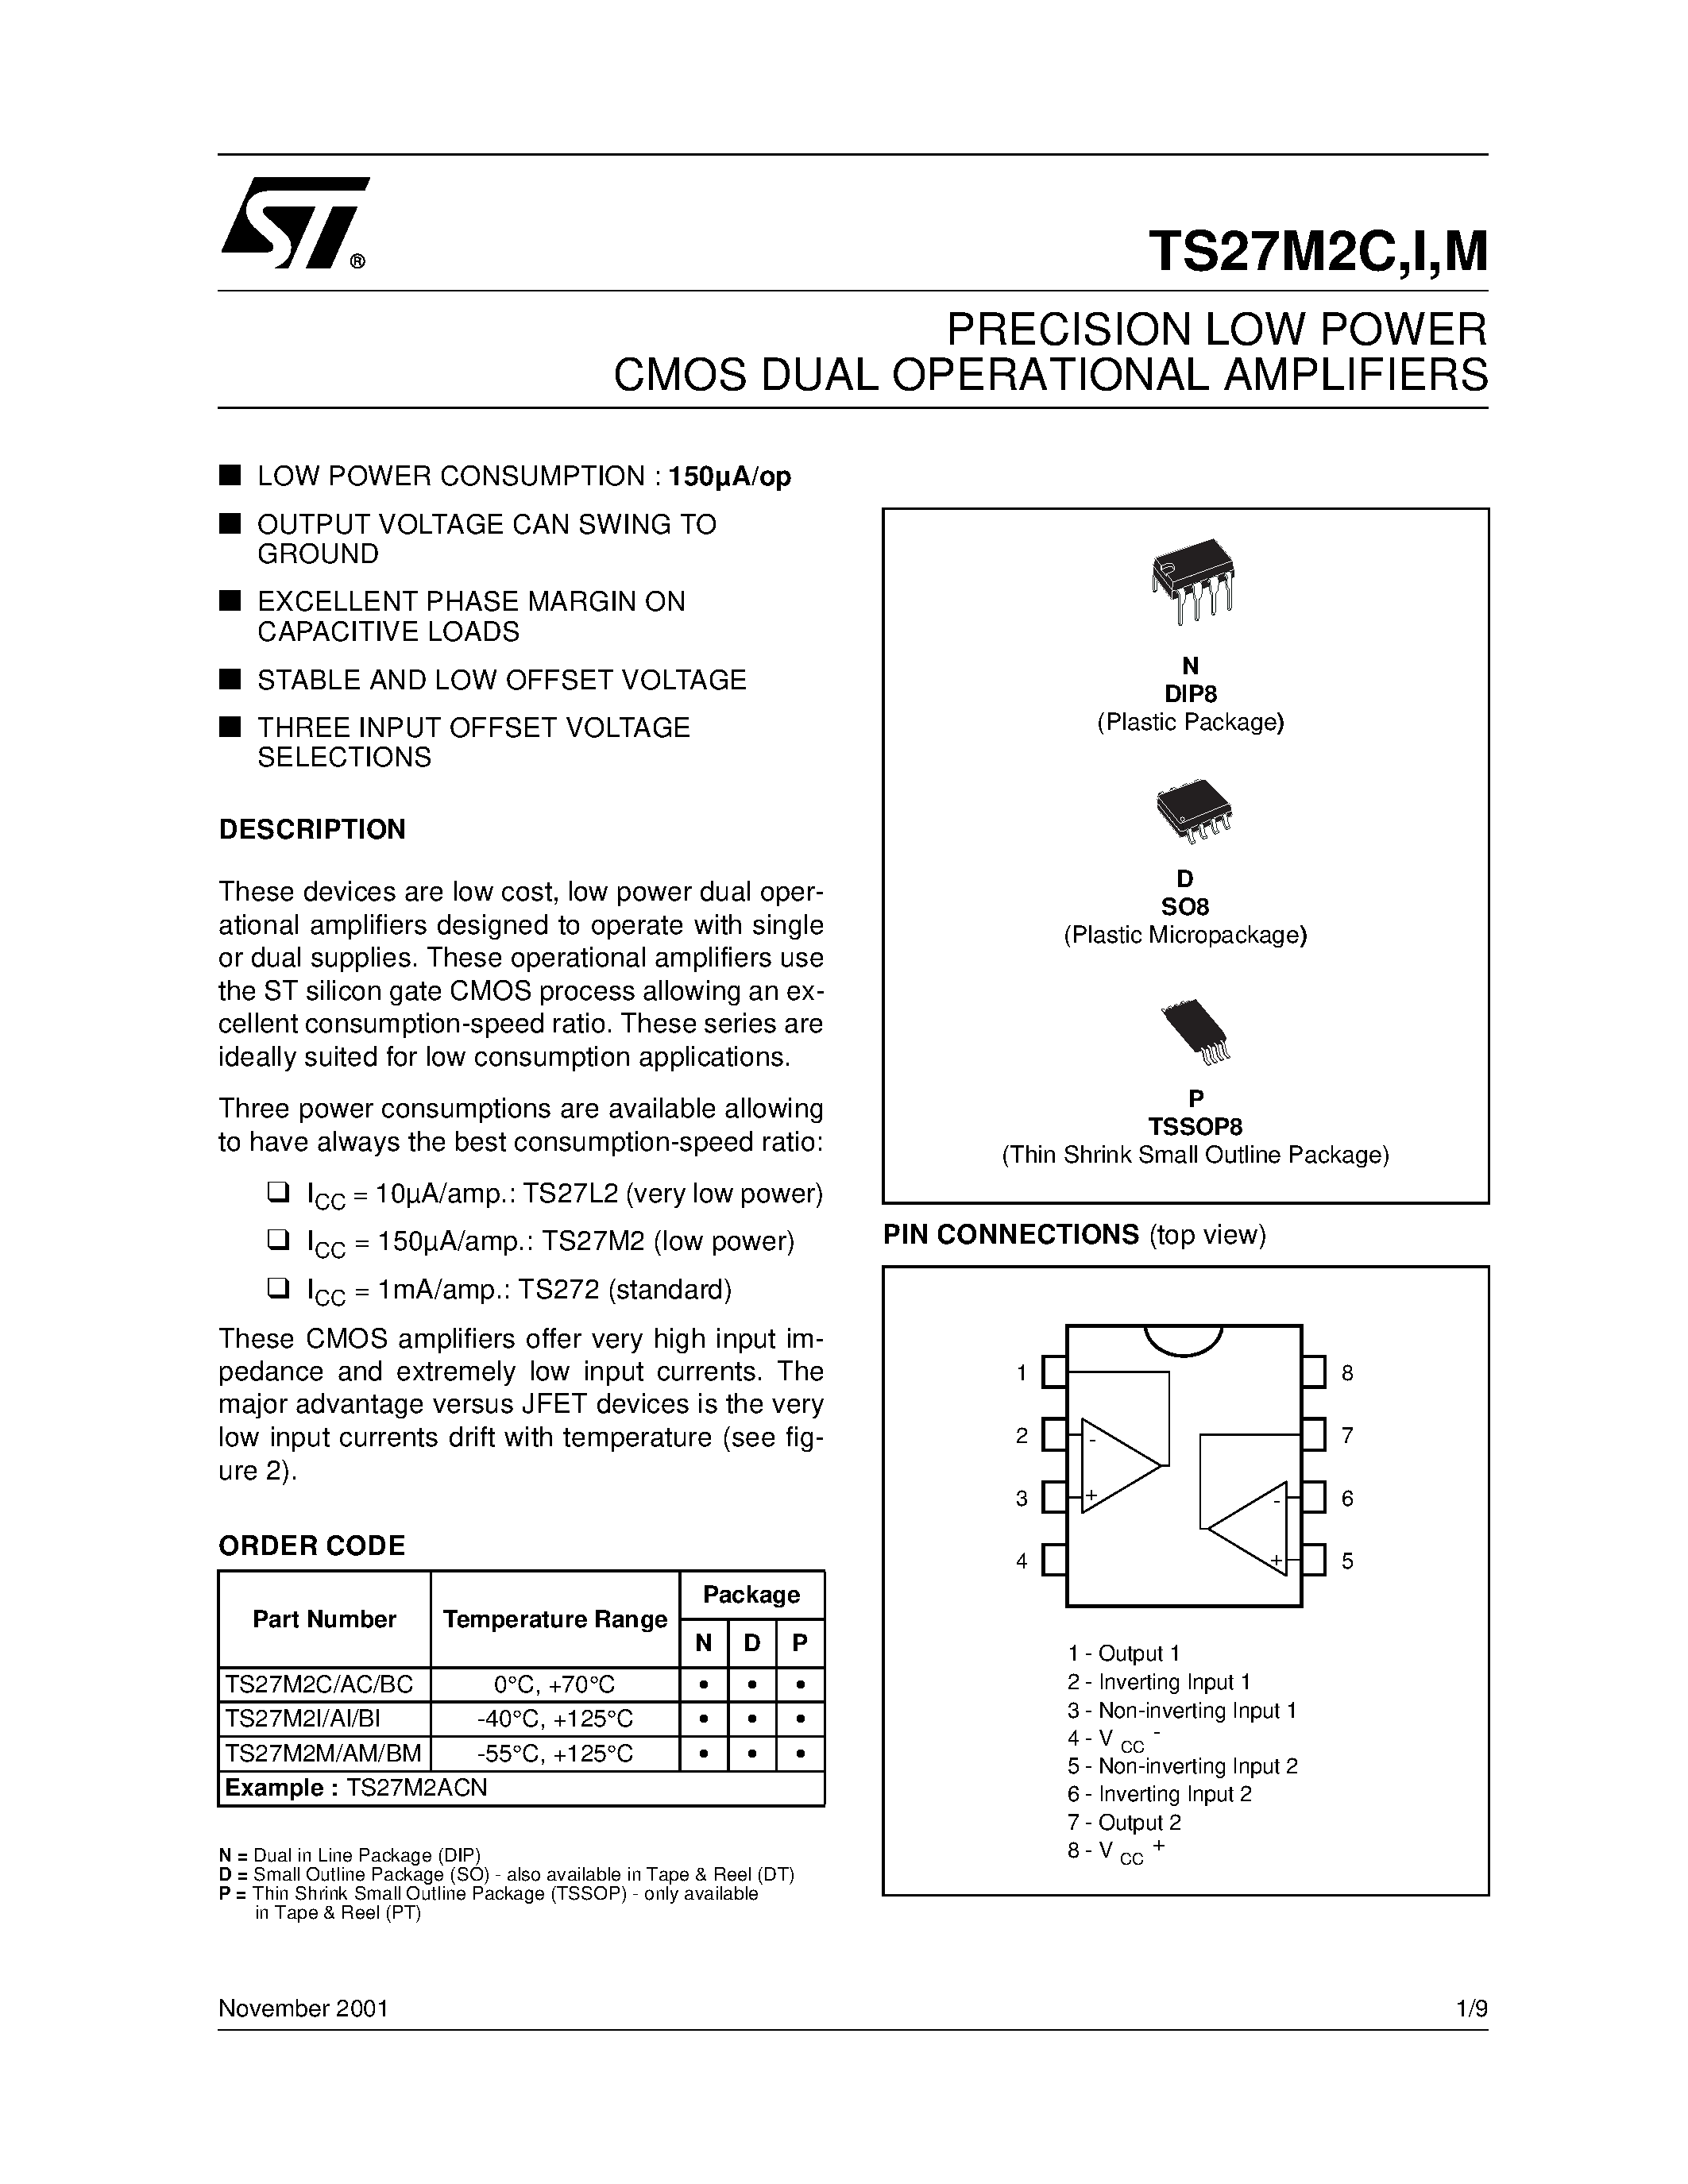 Datasheet TS27M2I - PRECISION LOW POWER CMOS DUAL OPERATIONAL AMPLIFIERS page 1